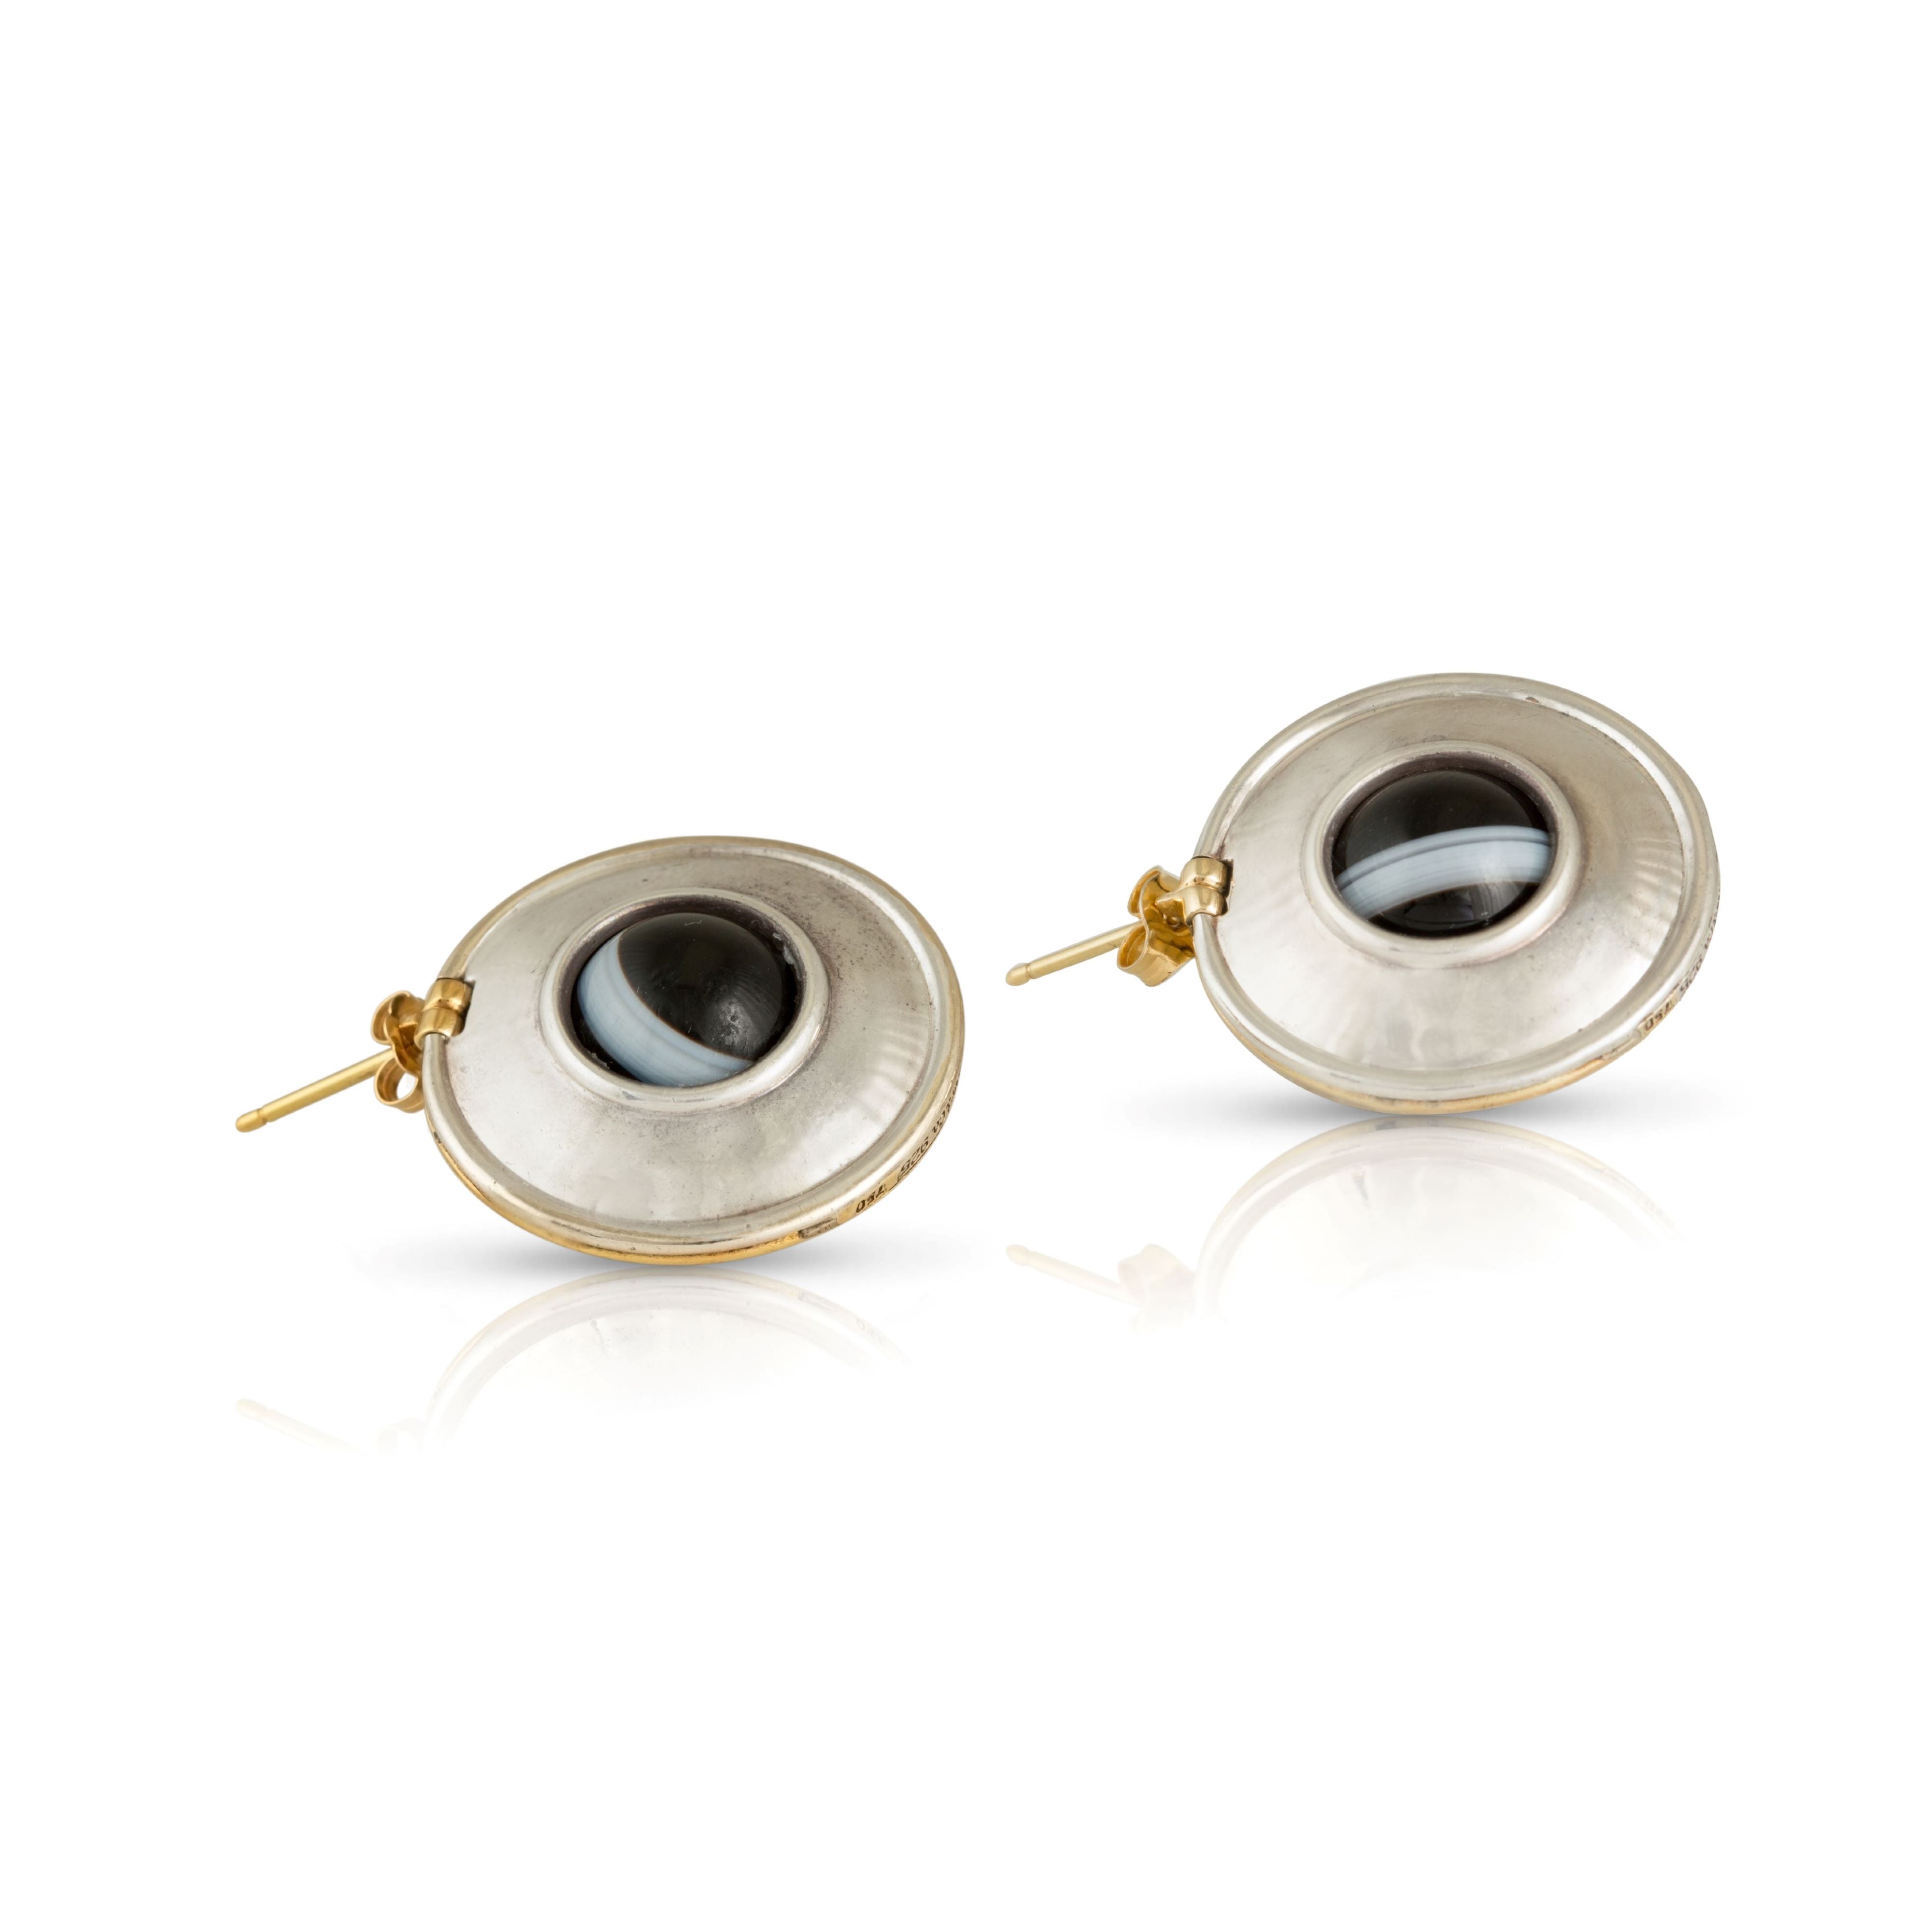 Reversible disc earrings with bull’s eye agate shown on the oxidised sterling silver side